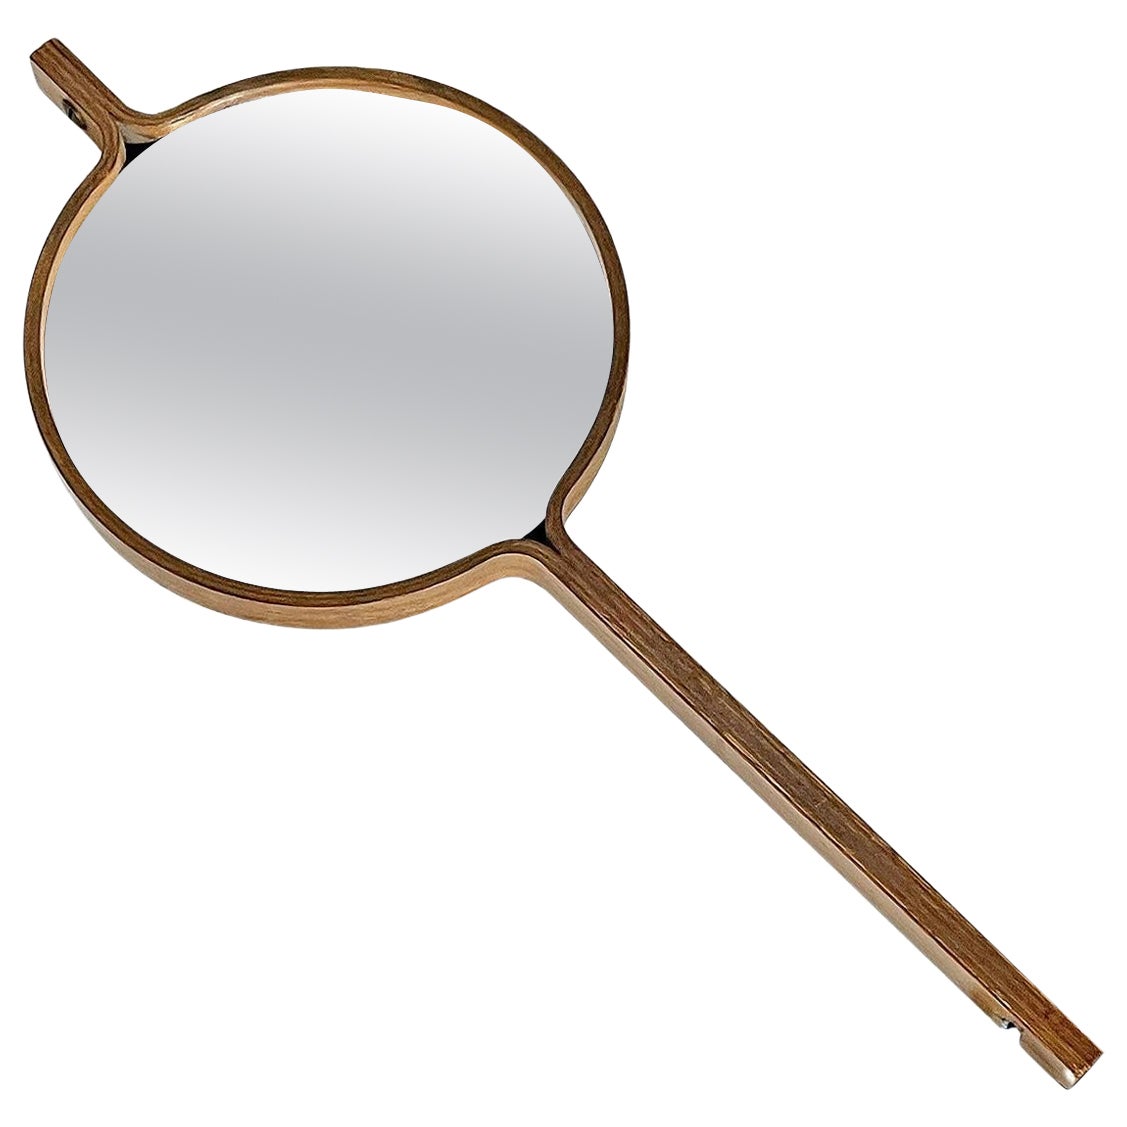 Hand/Wall Mirror in Teak by Bech & Starup Denmark -1960s For Sale